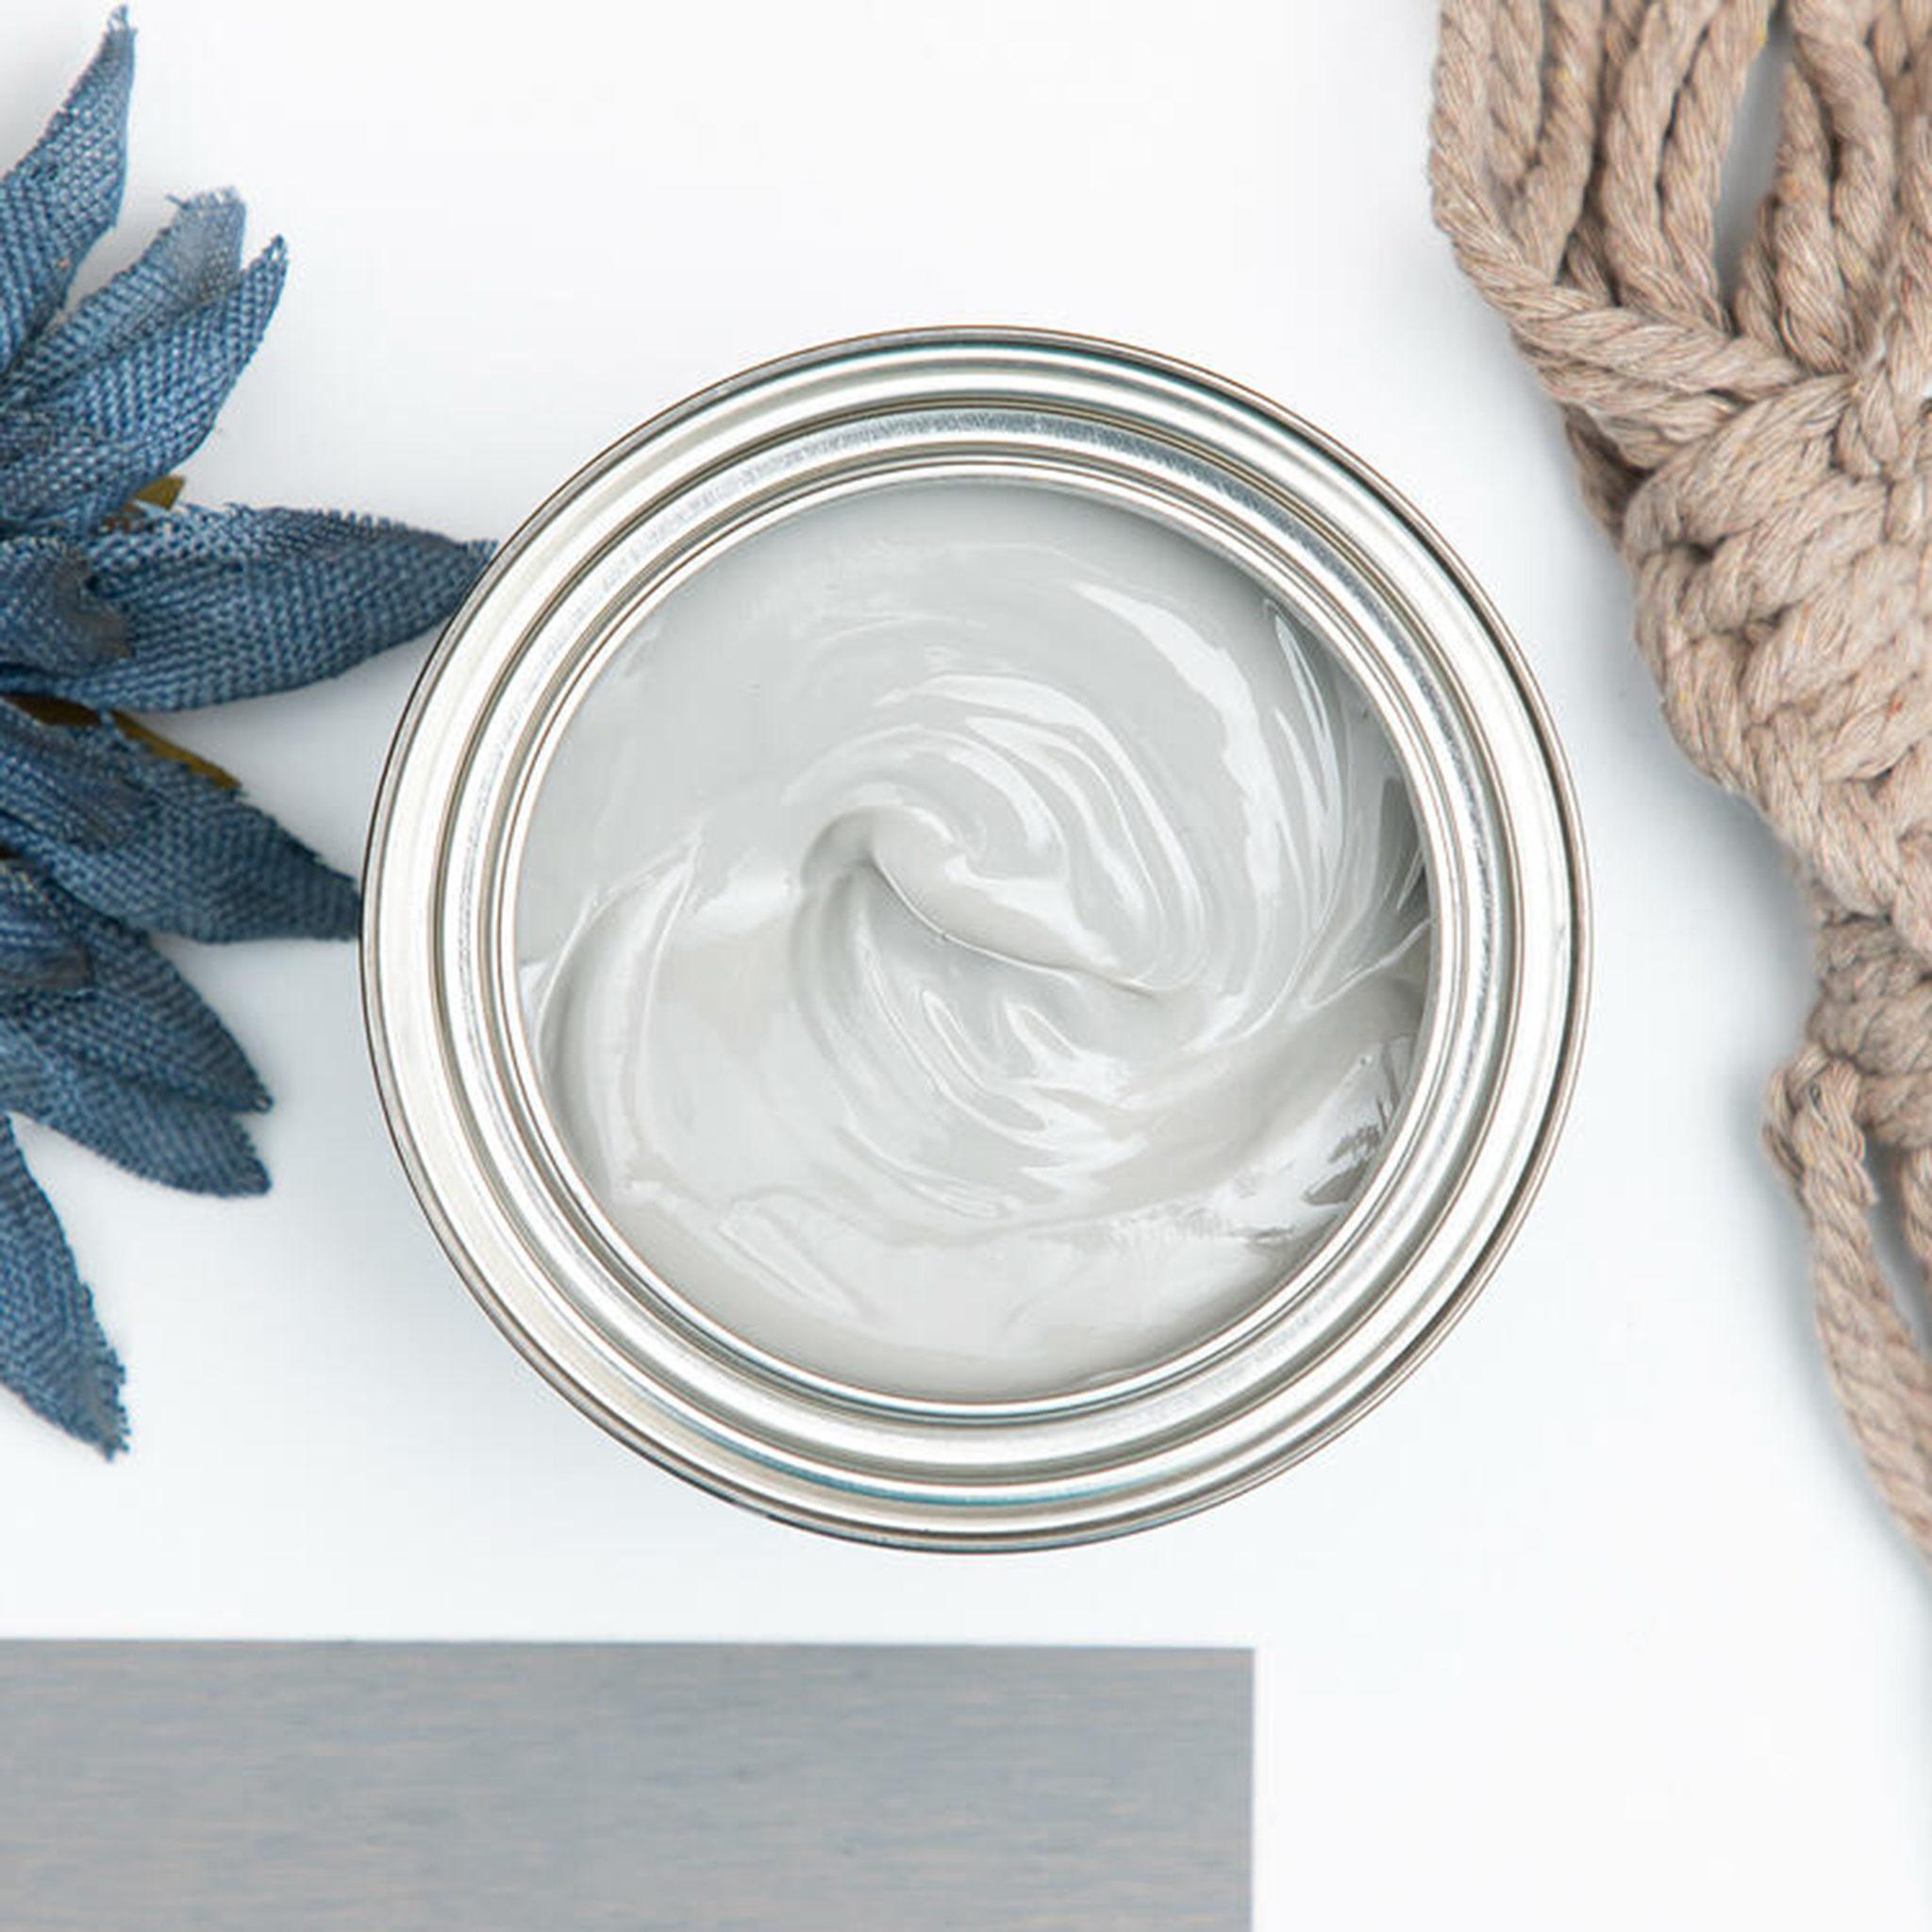 A arial view of an open can of Dixie Belle's No Pain Gel Stain in Weathered Gray is against a white background. The can is surrounded by rope, a cloth blue flower, and a wood swatch featuring the stain color.